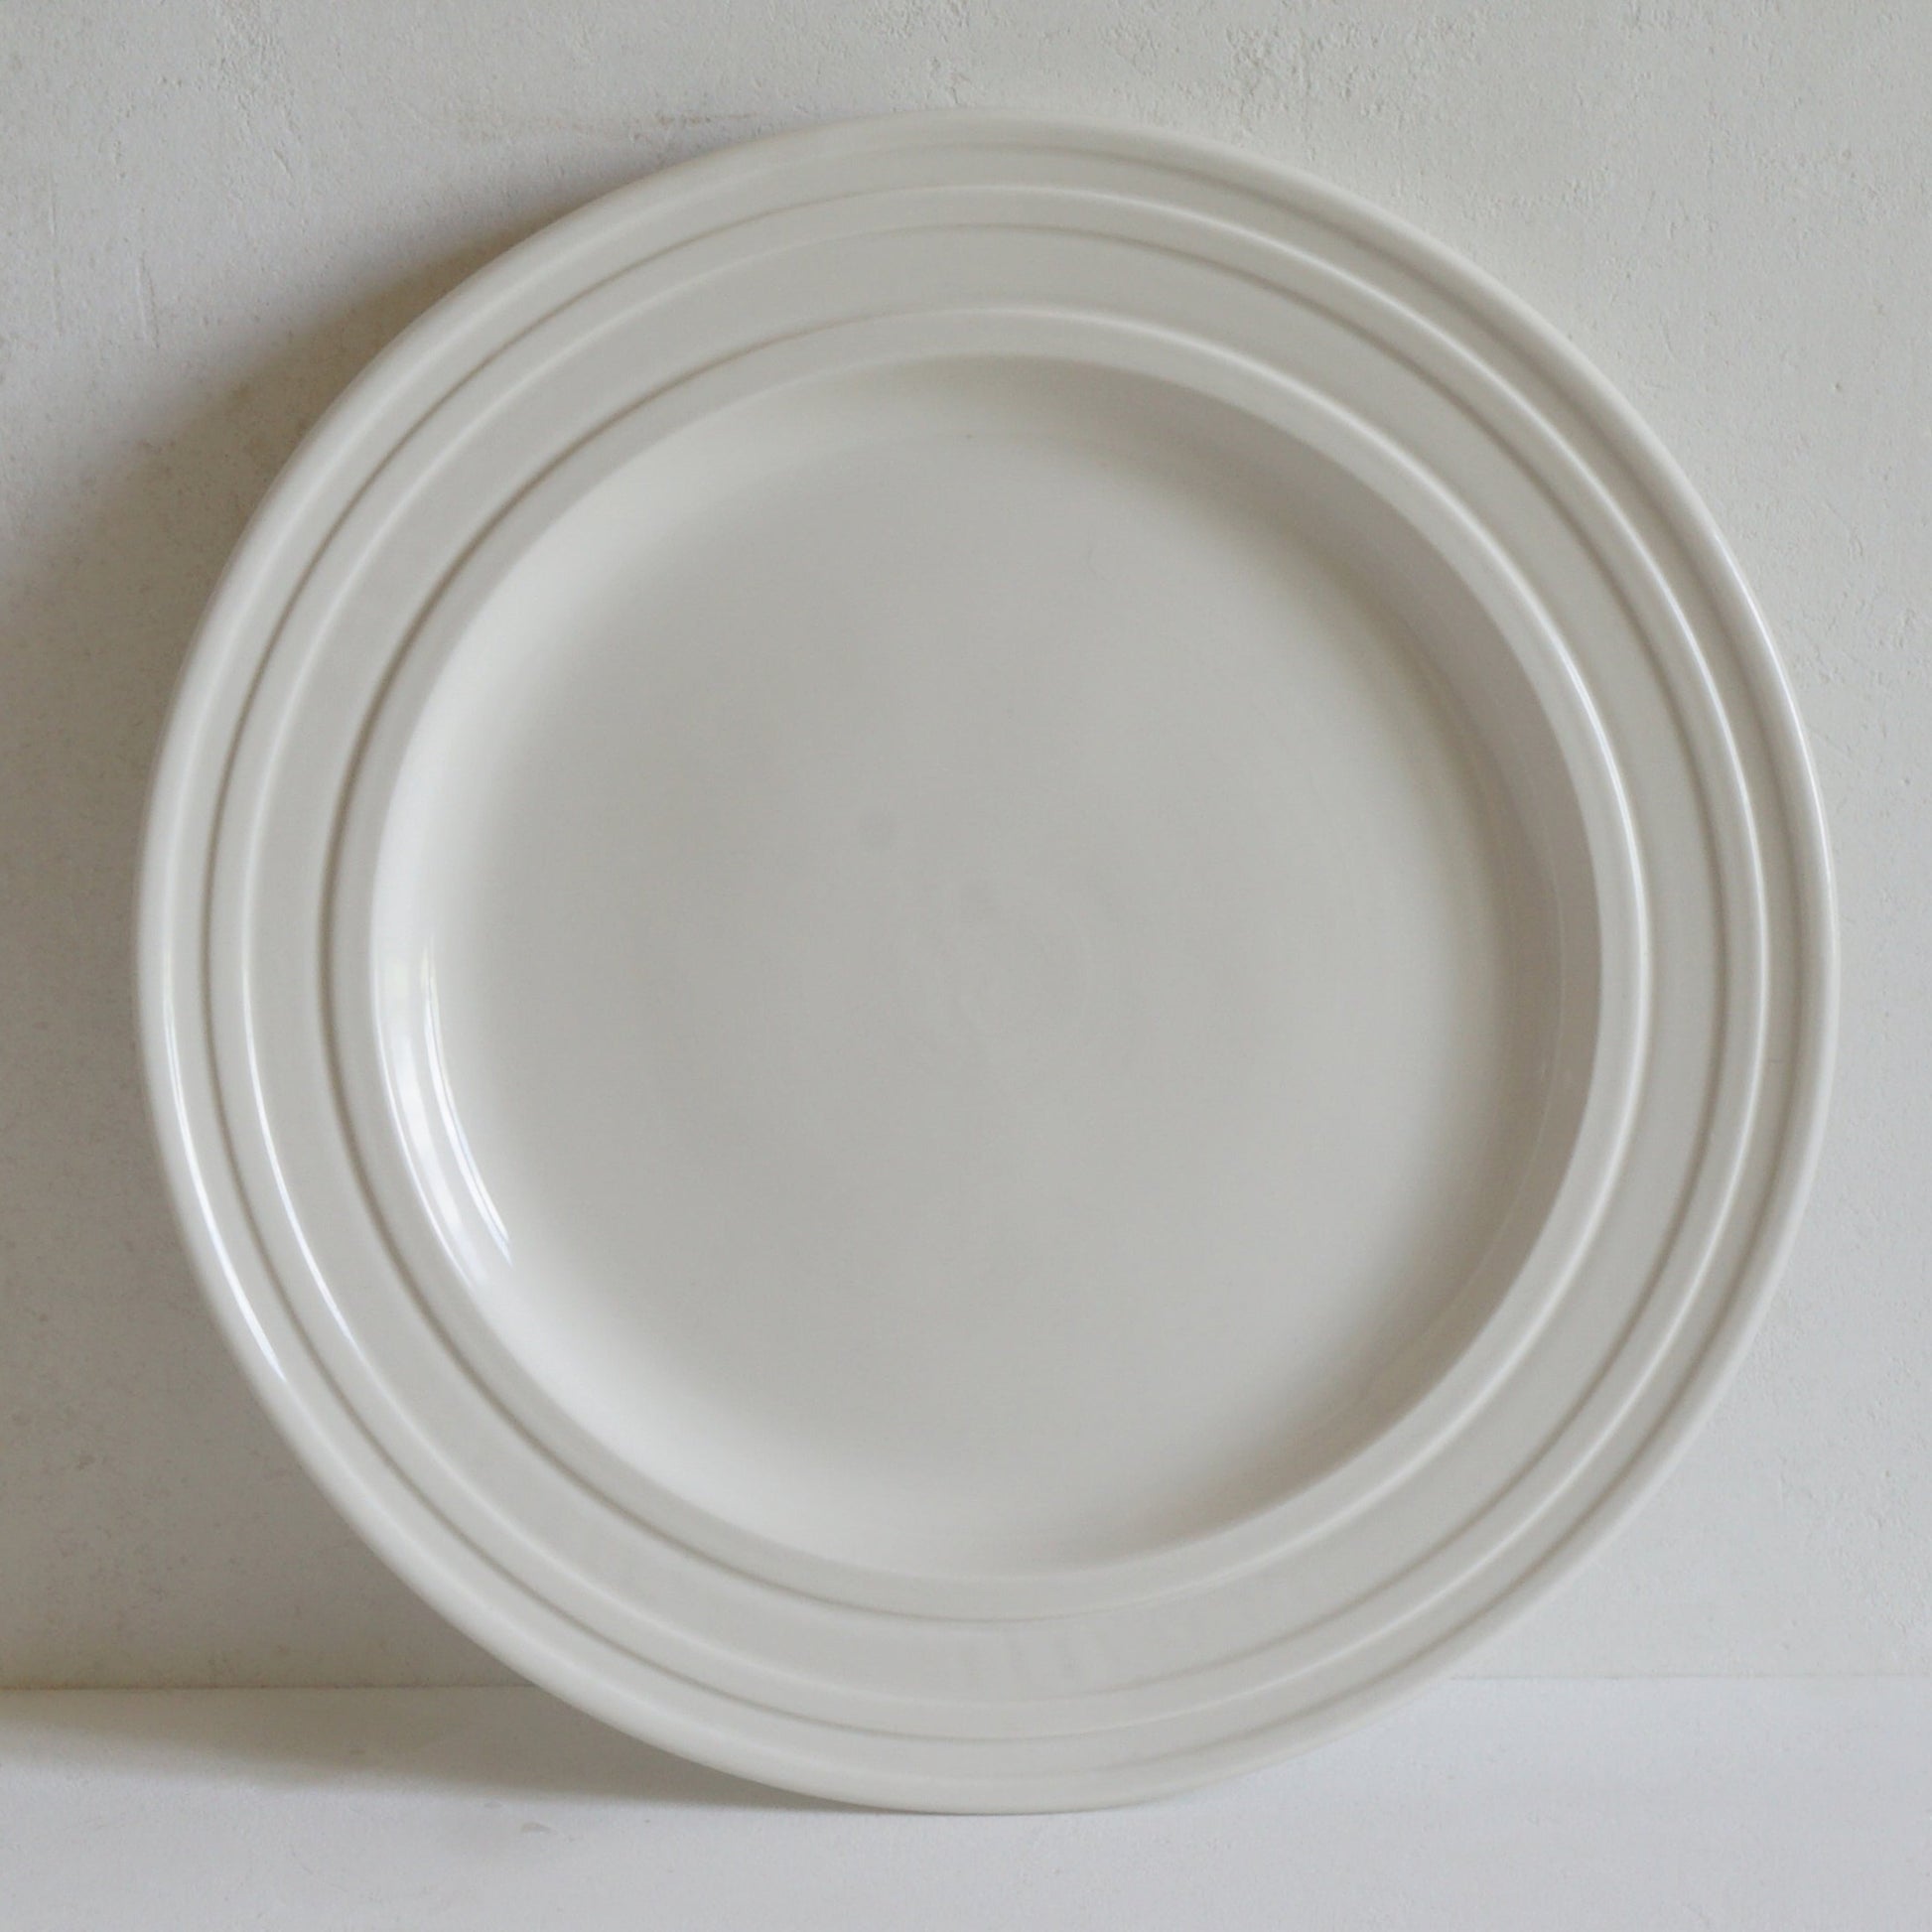 Impressed Line Large Dinner Plate | Charger | Luxury Pottery Dinnerware